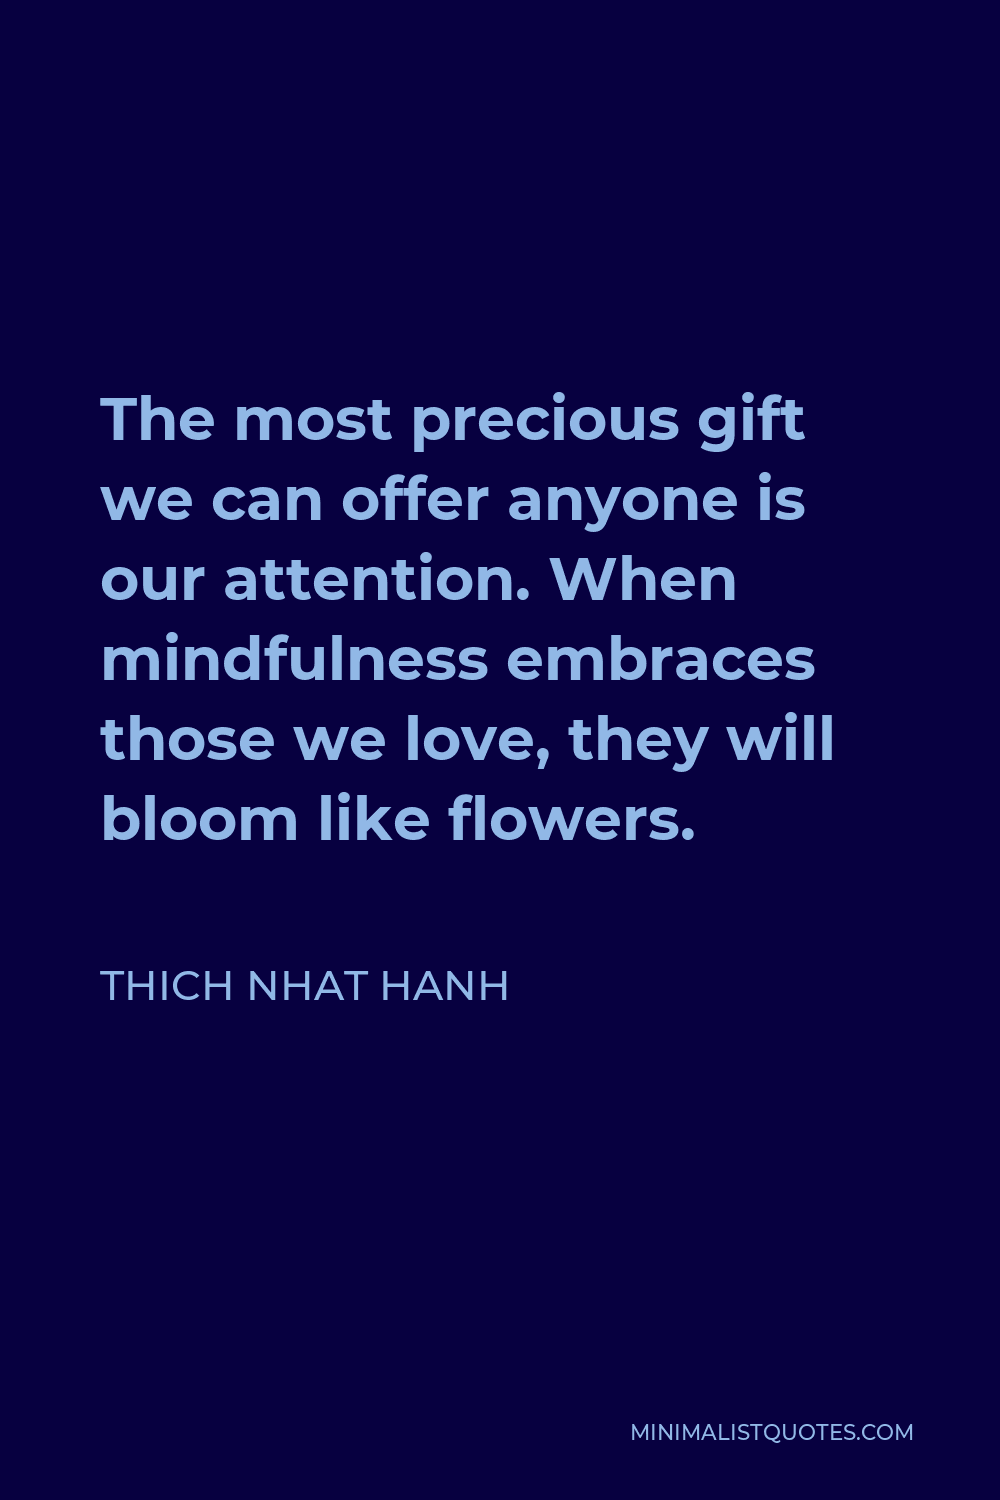 Thich Nhat Hanh Quote - The most precious gift we can offer anyone is our attention. When mindfulness embraces those we love, they will bloom like flowers.